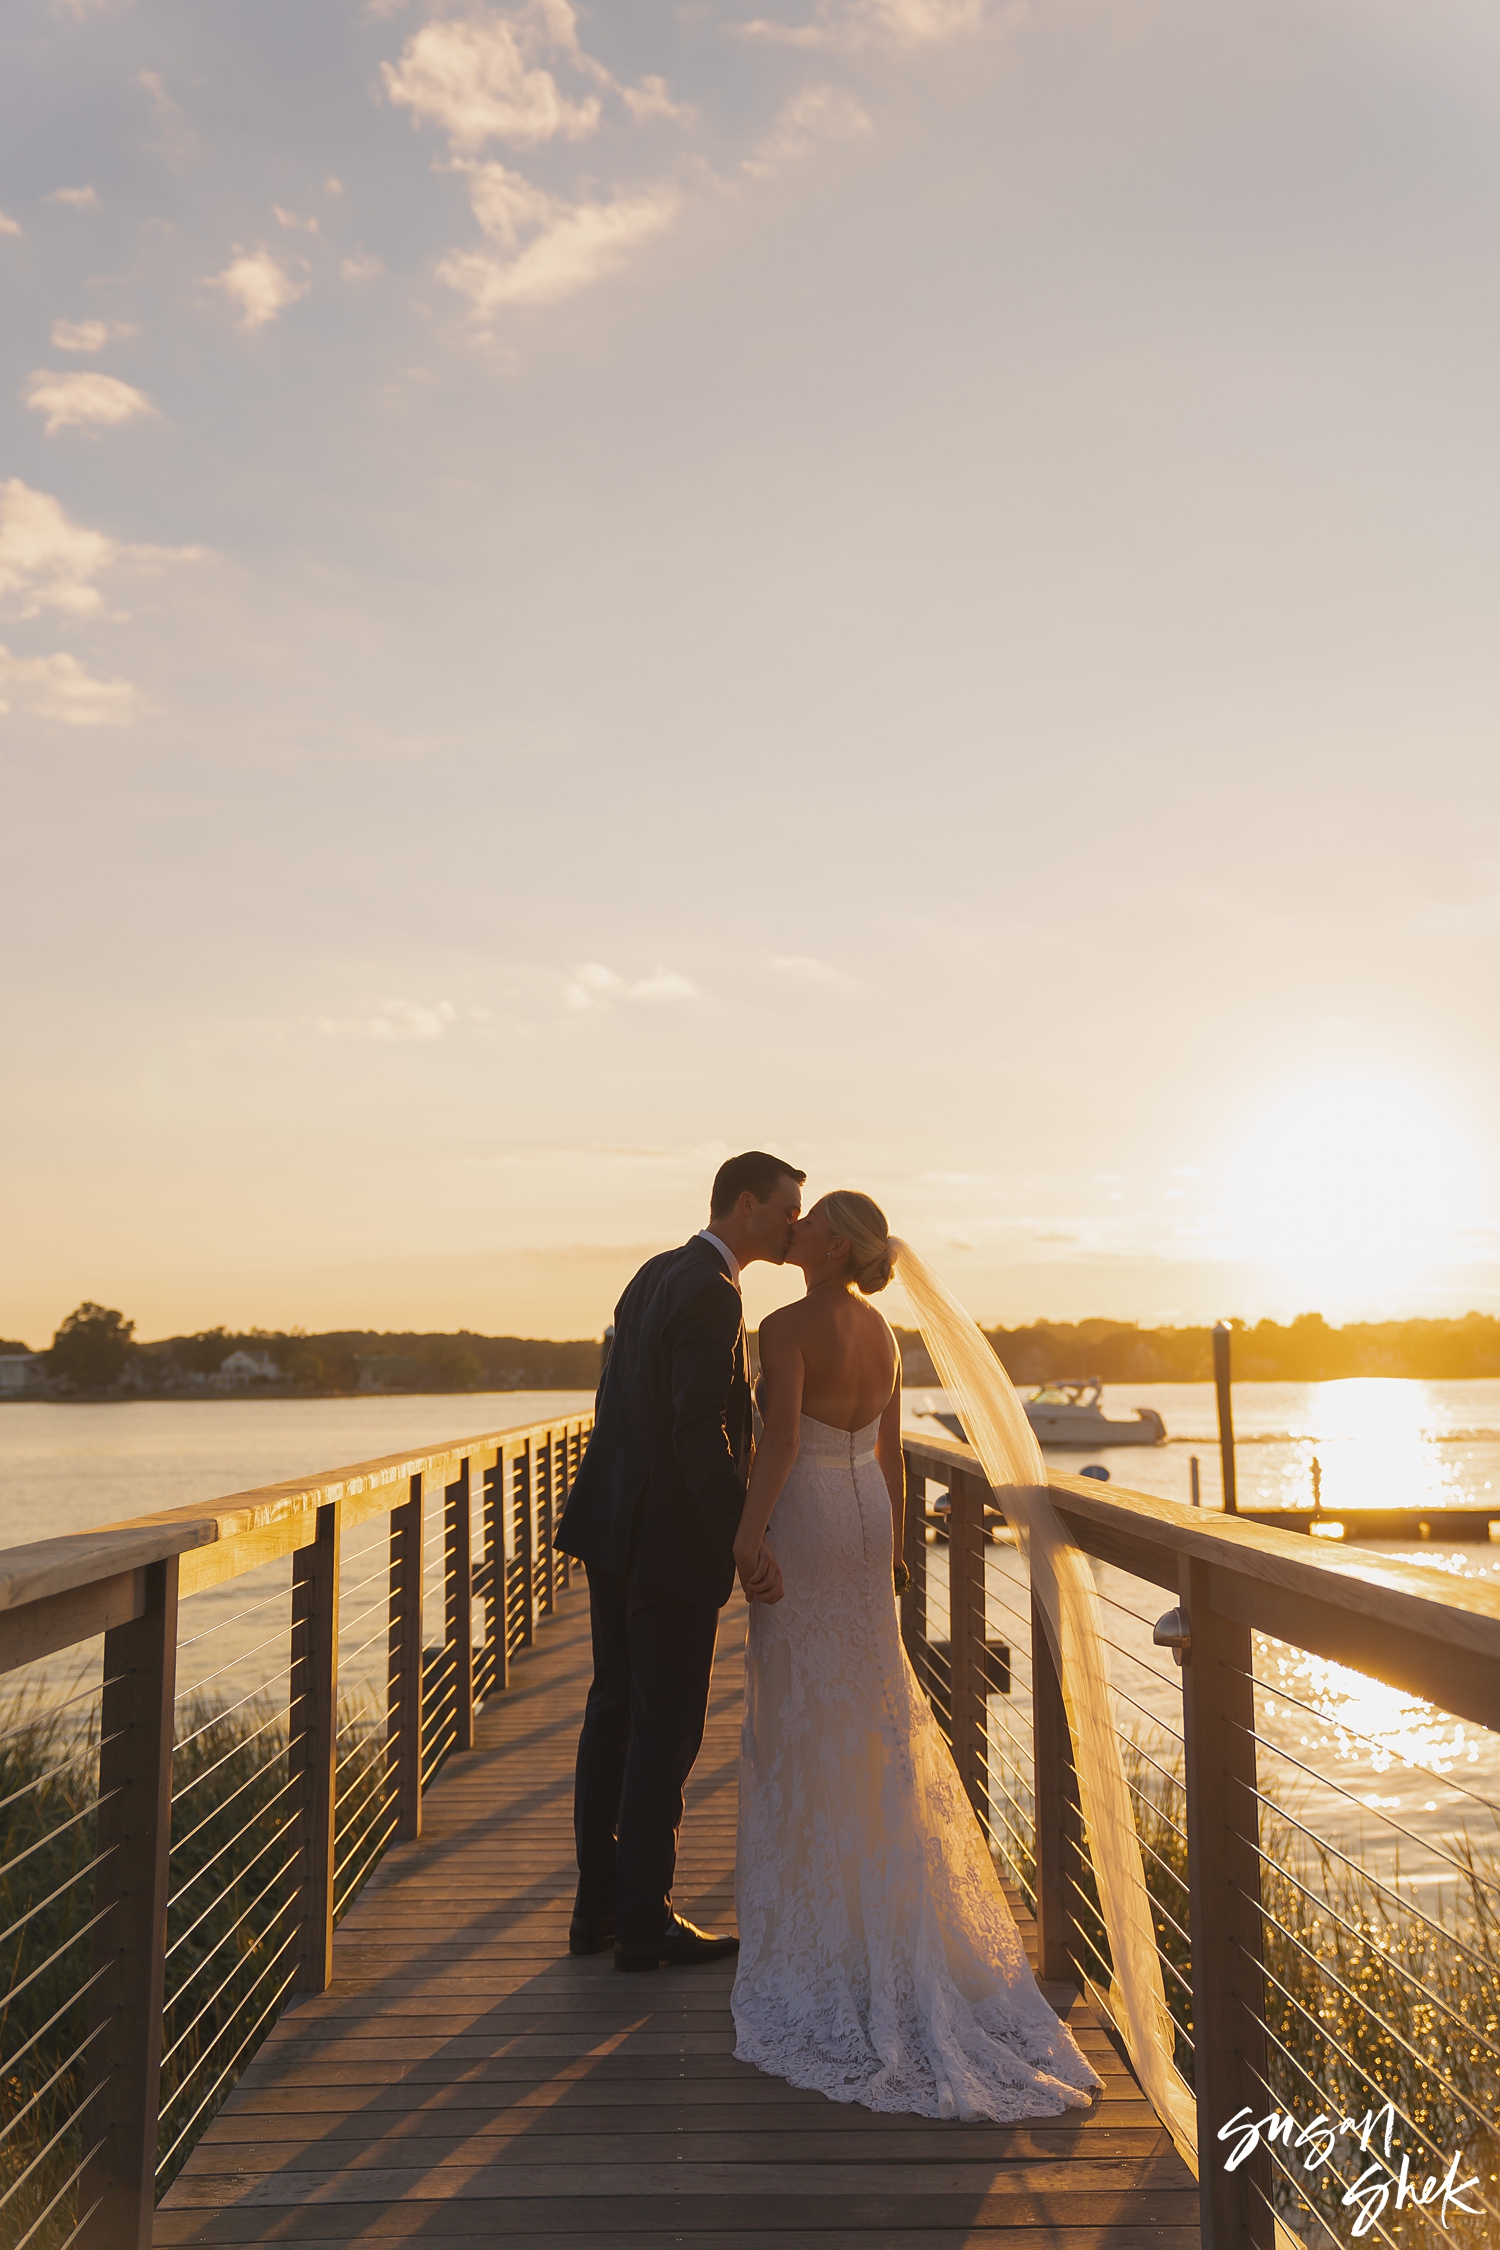 Connecticut weddings, Shore and Country Club Wedding, Weddings in Connecticut, Pronovias Wedding Dress, CT Wedding Photographer, NYC Wedding Photographer,